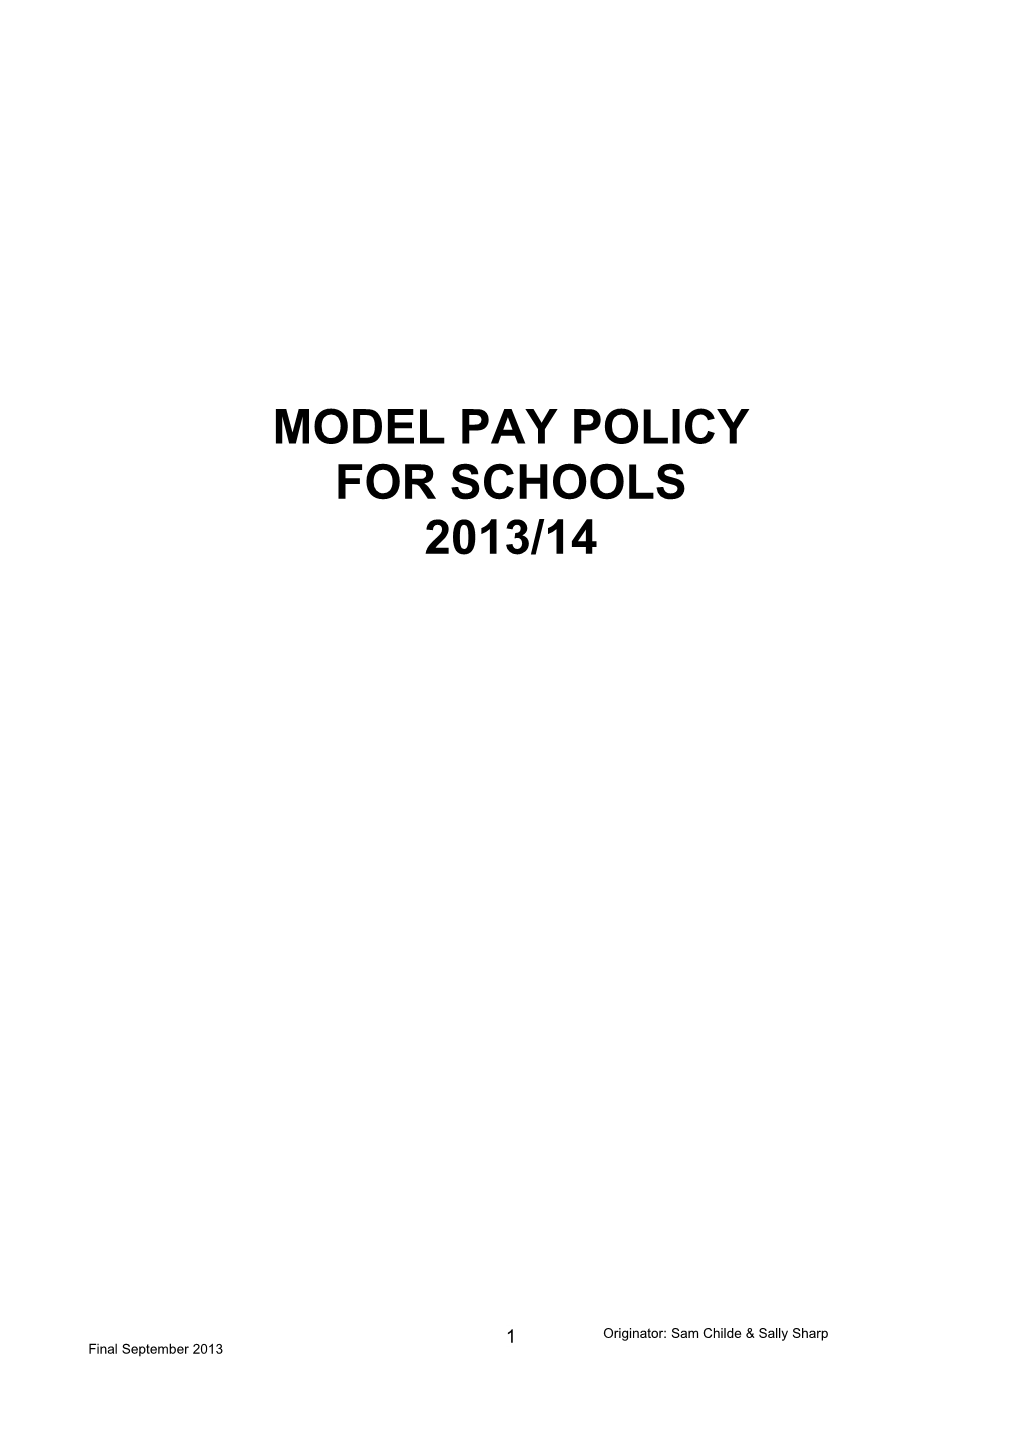 Model Pay Policy